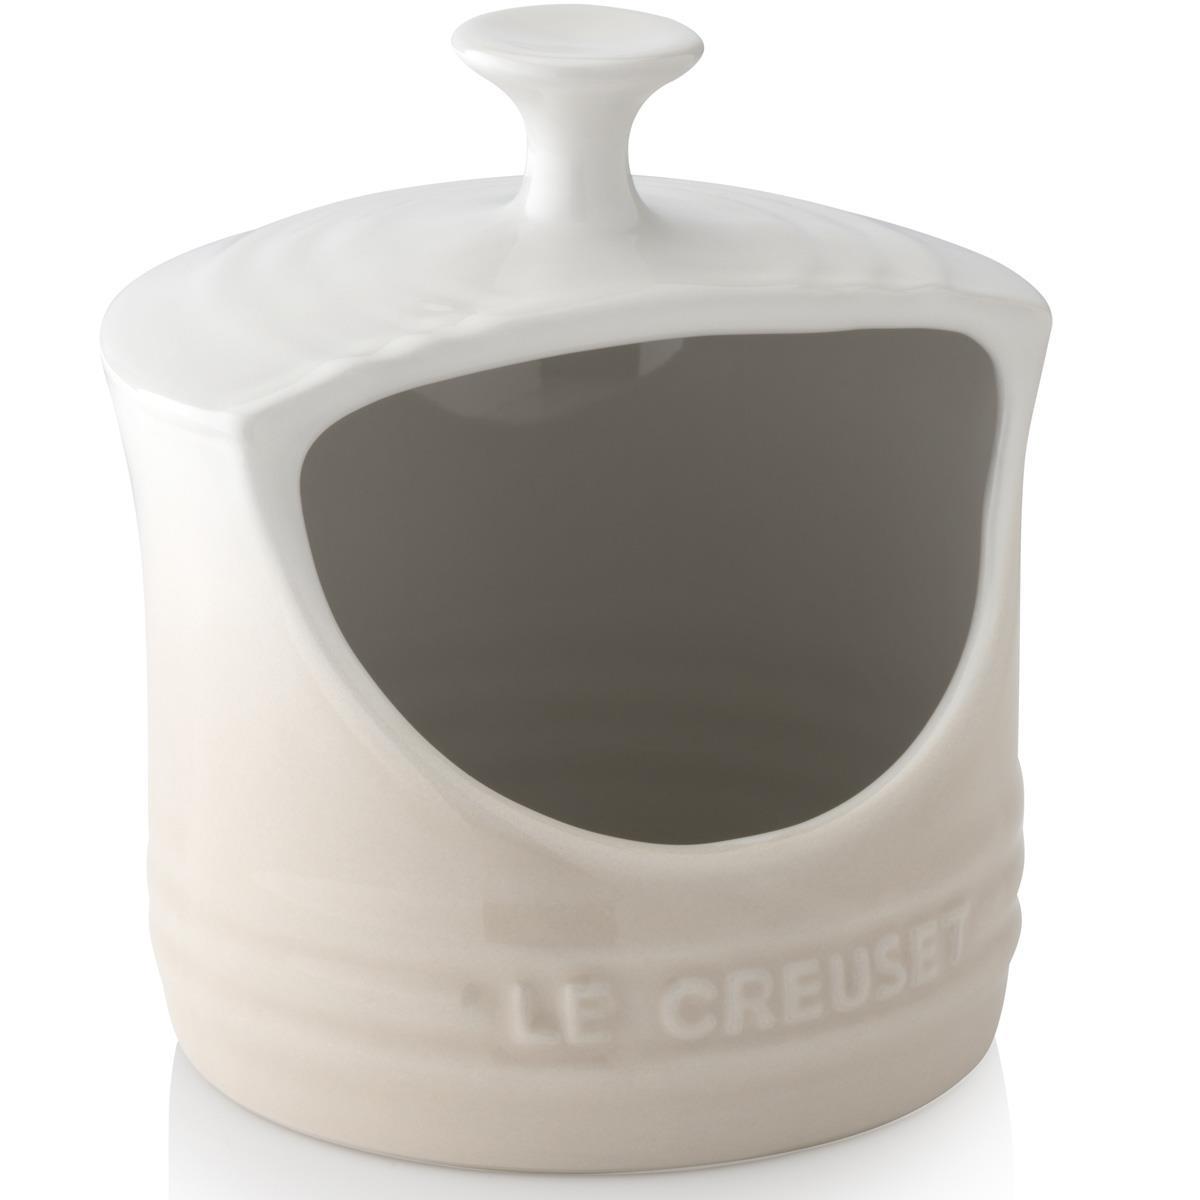 What is the size of the Le Creuset salt pig?